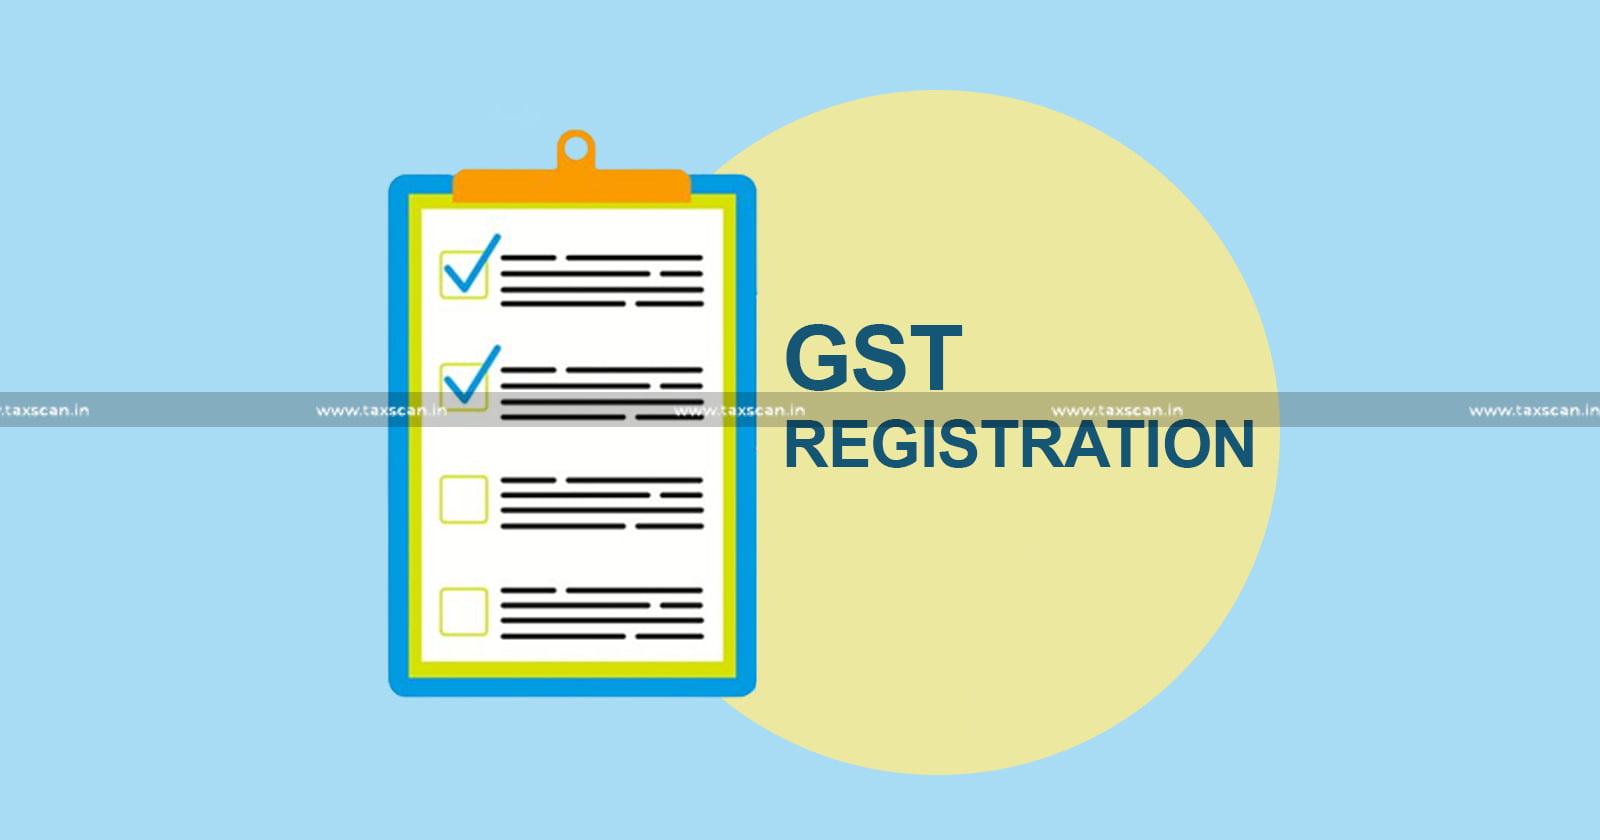 GST - Registration - Rules - notified - by - CBIC - Mobile - Number - and - Email - to - be - verified - by - OTPs - TAXSCAN